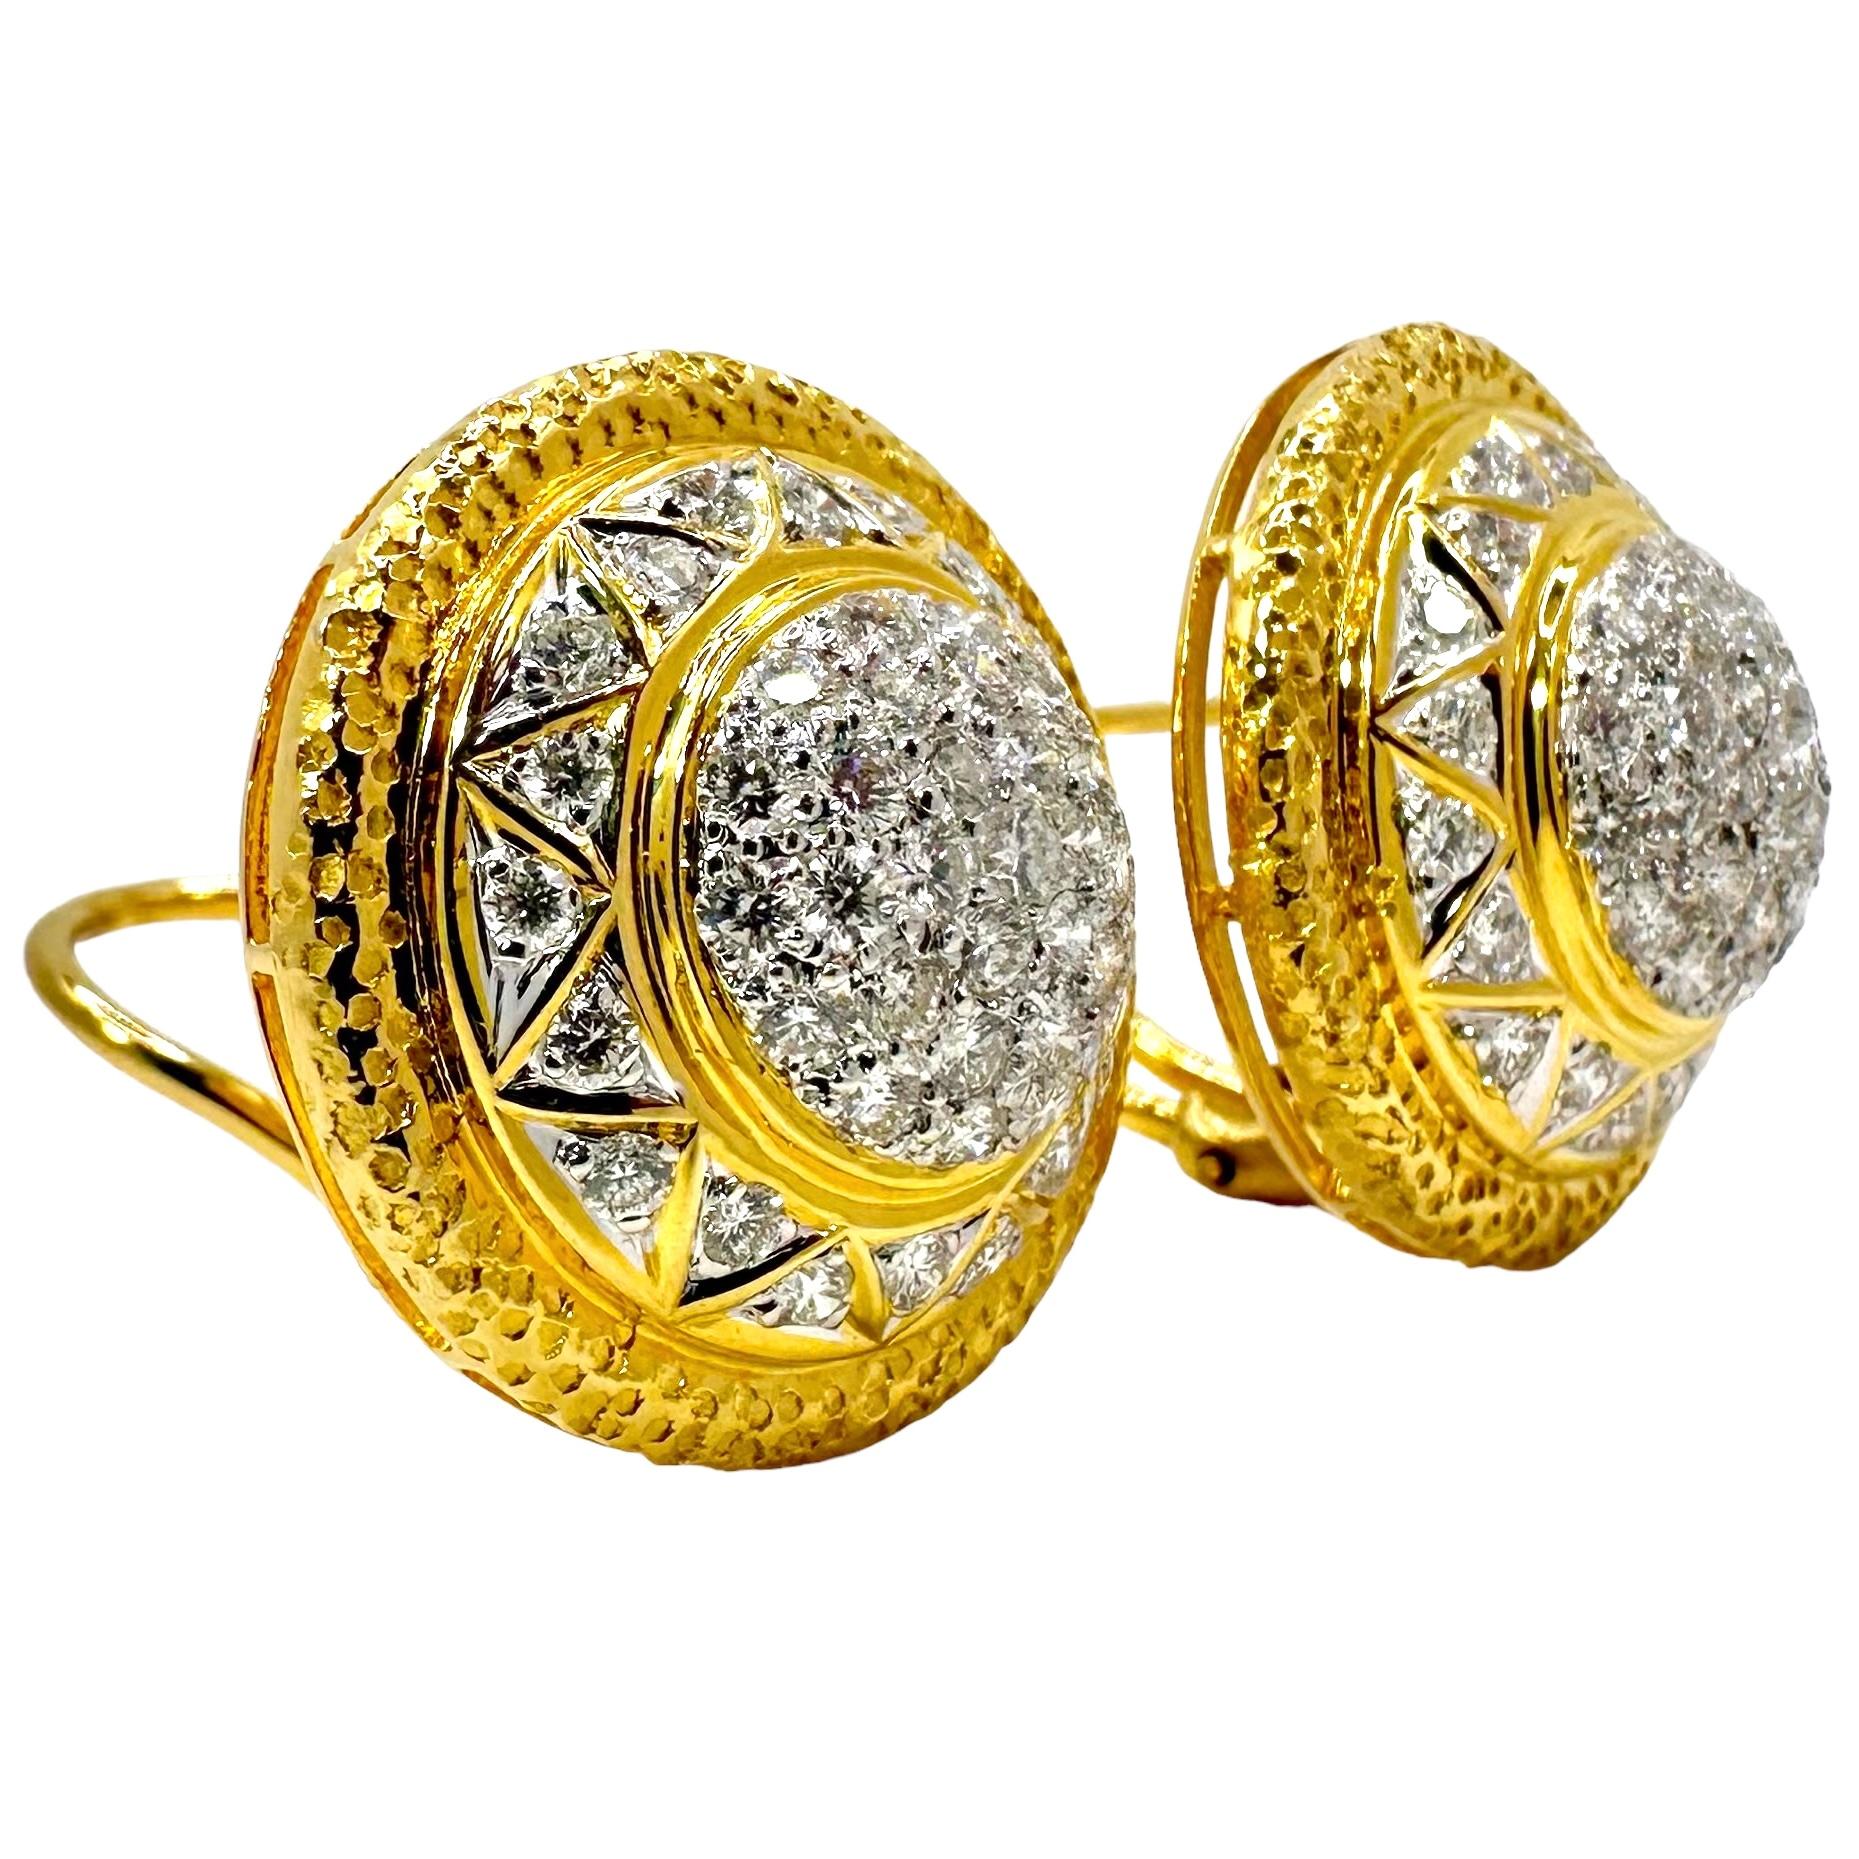 18K Stylish & Tailored Gold & Diamond Encrusted Dome Earrings 7/8 Inch Diameter For Sale 1